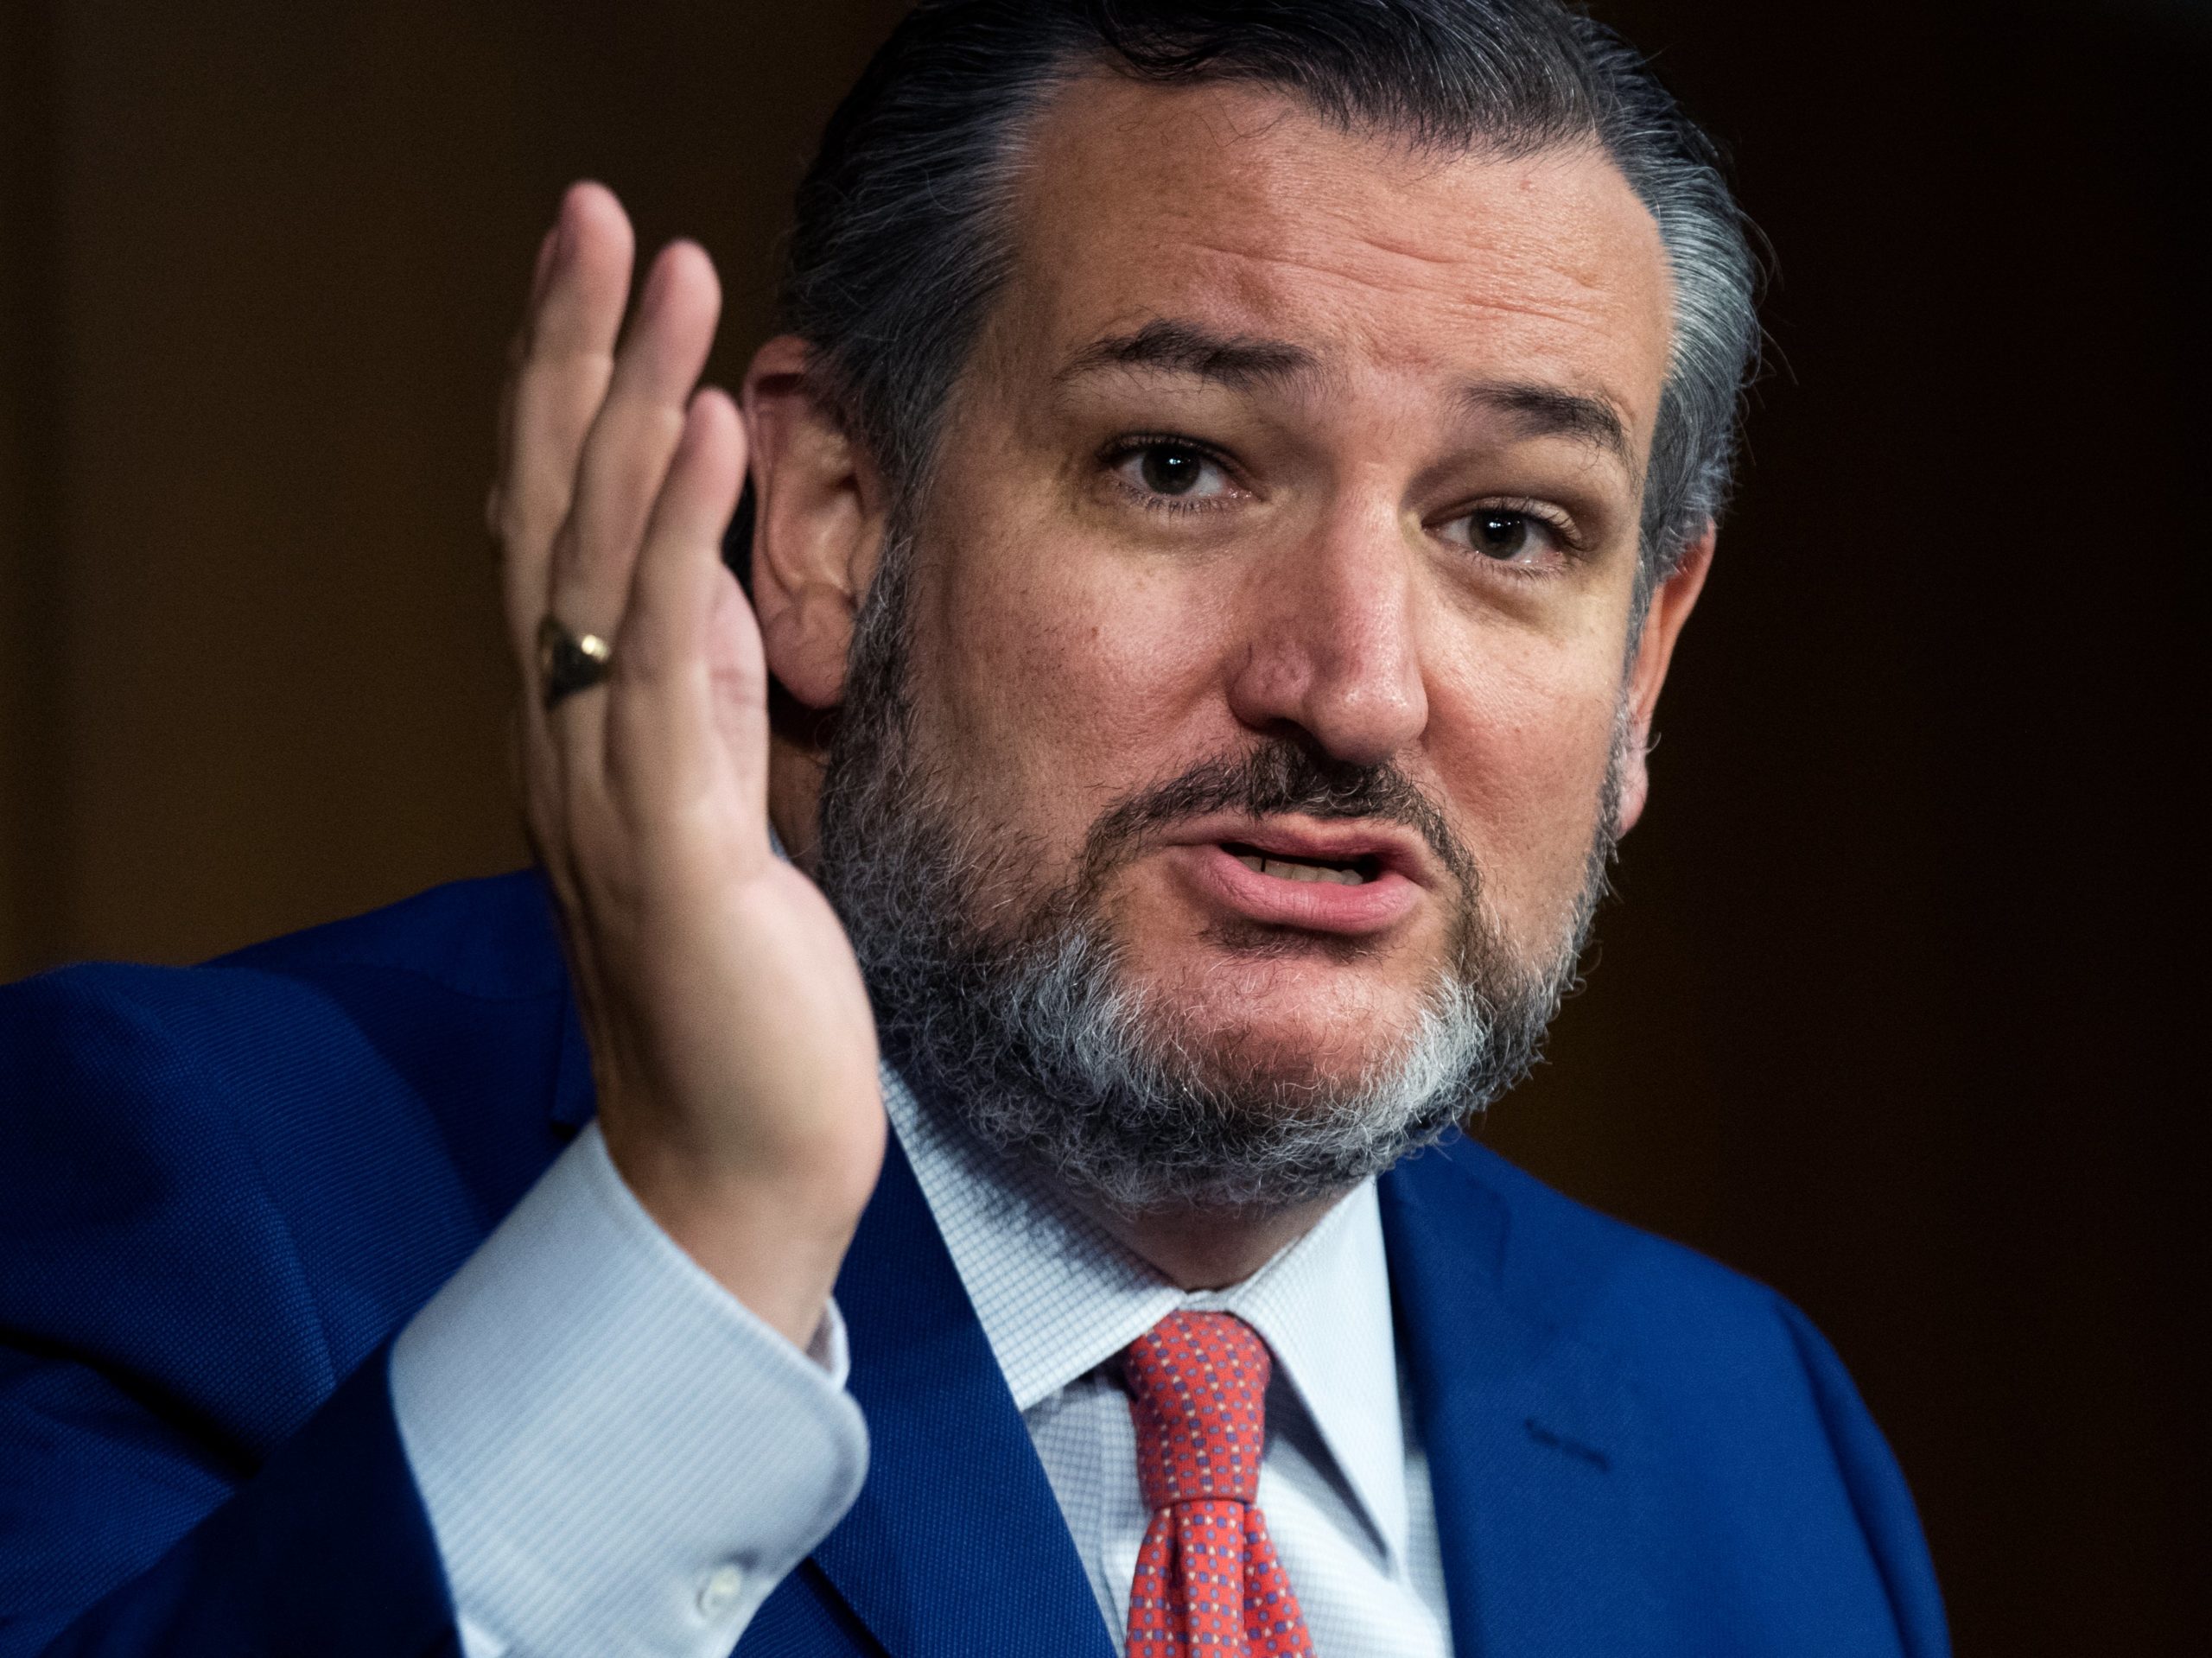 Ted Cruz just tried this joke about him abandoning Texas during a major storm – it bombed